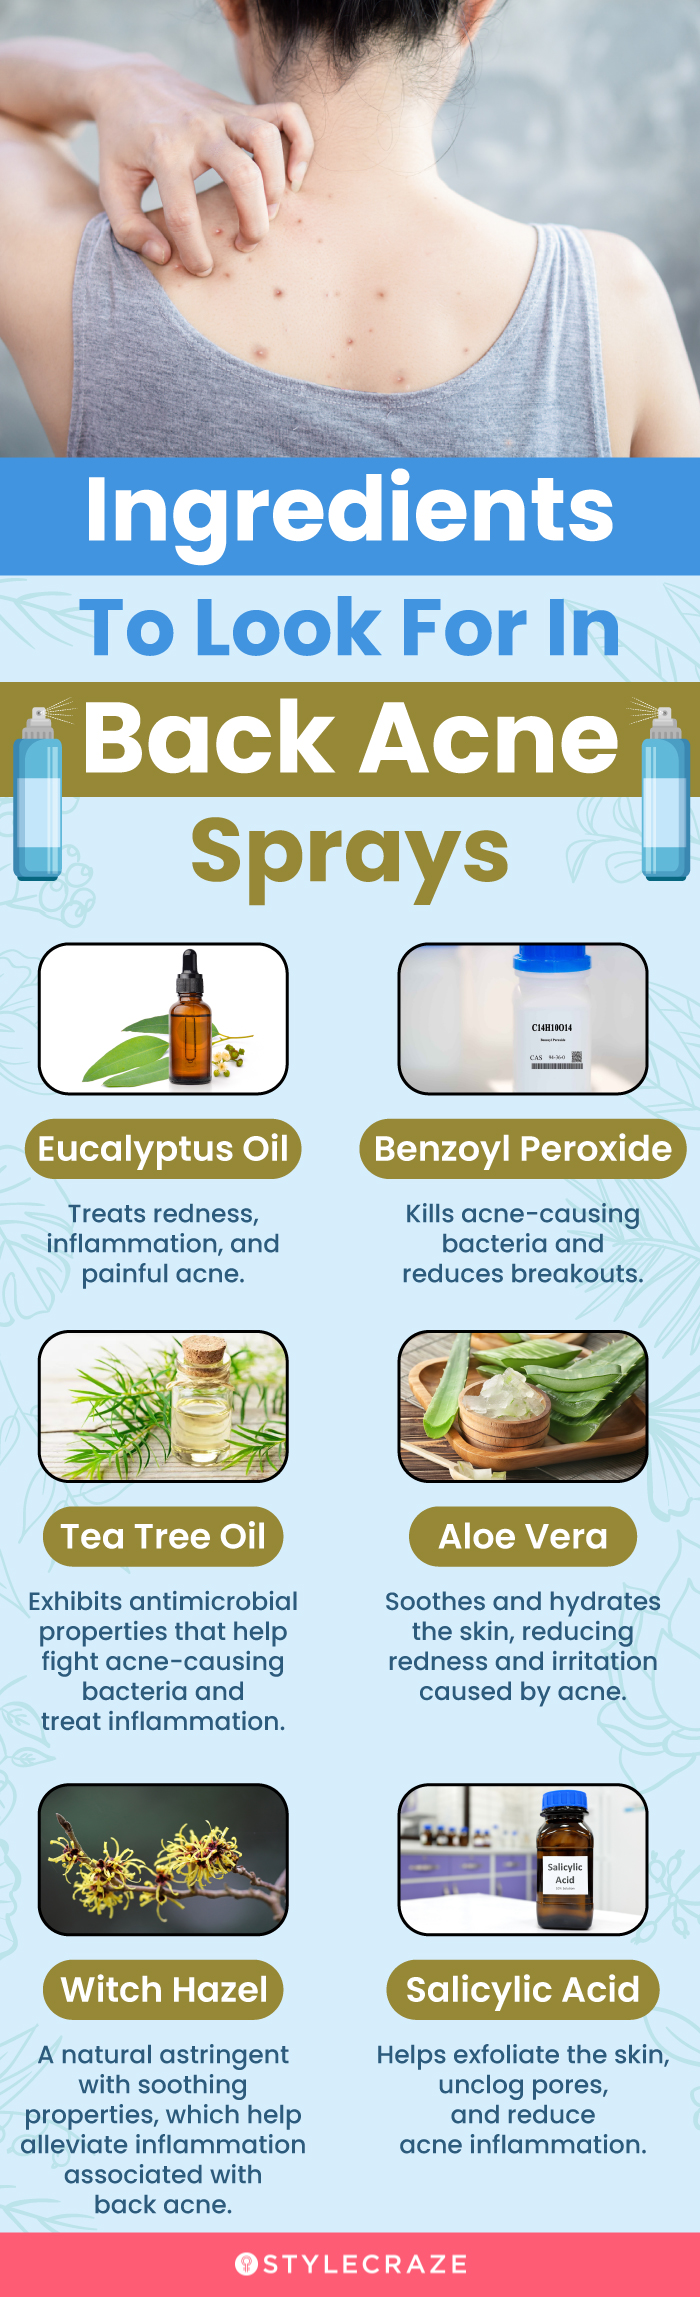 Ingredients To Look For In Back Acne Sprays (infographic)